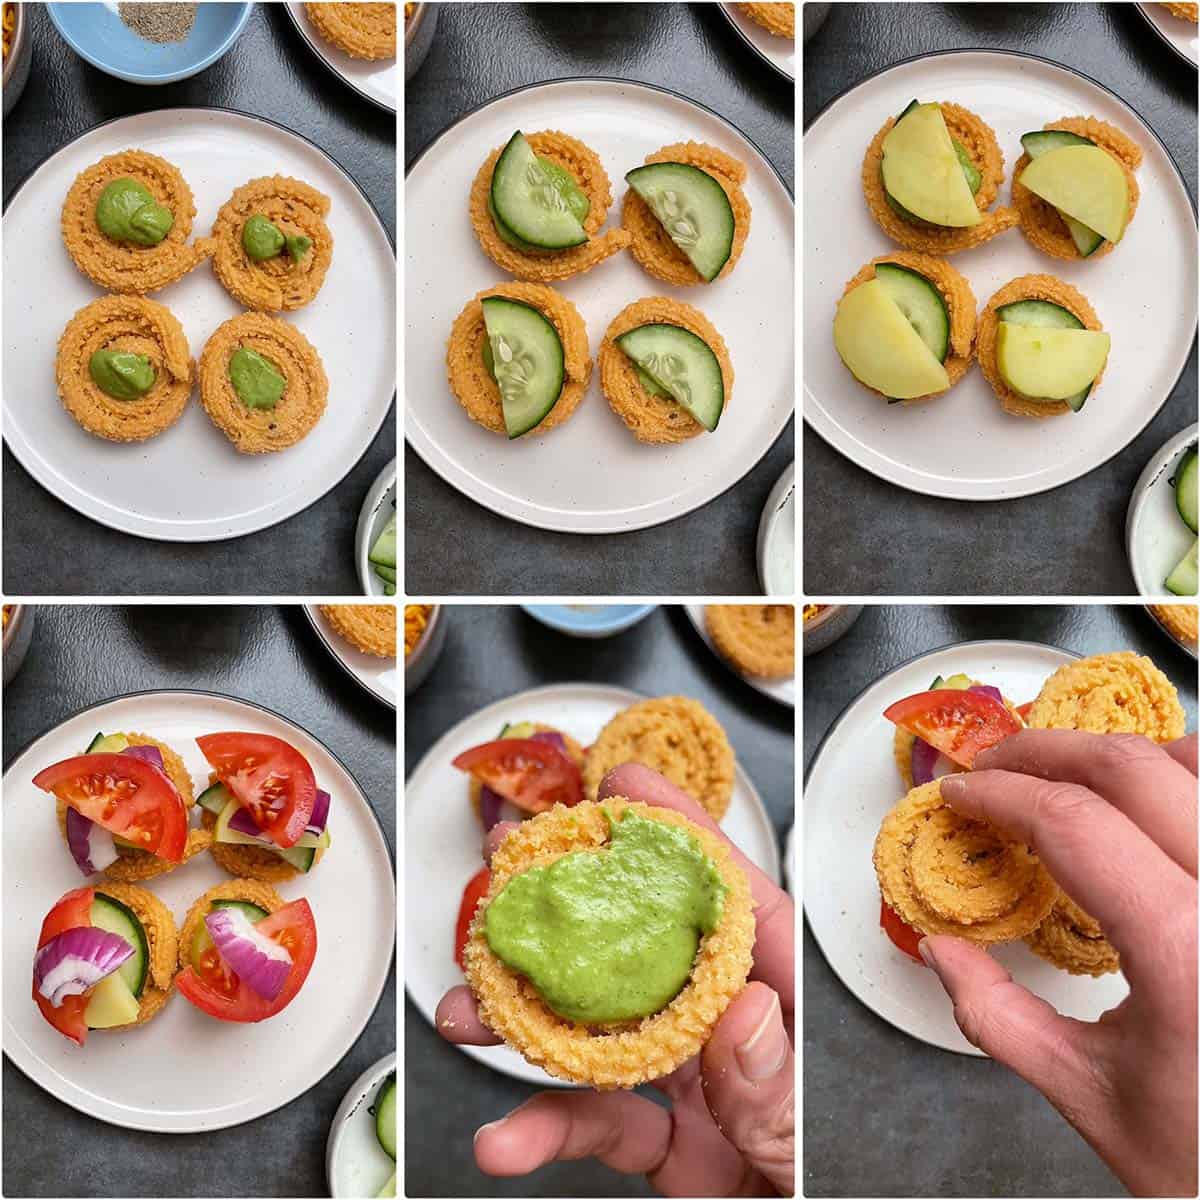 6 panel photo showing the making of recipe with chakli.